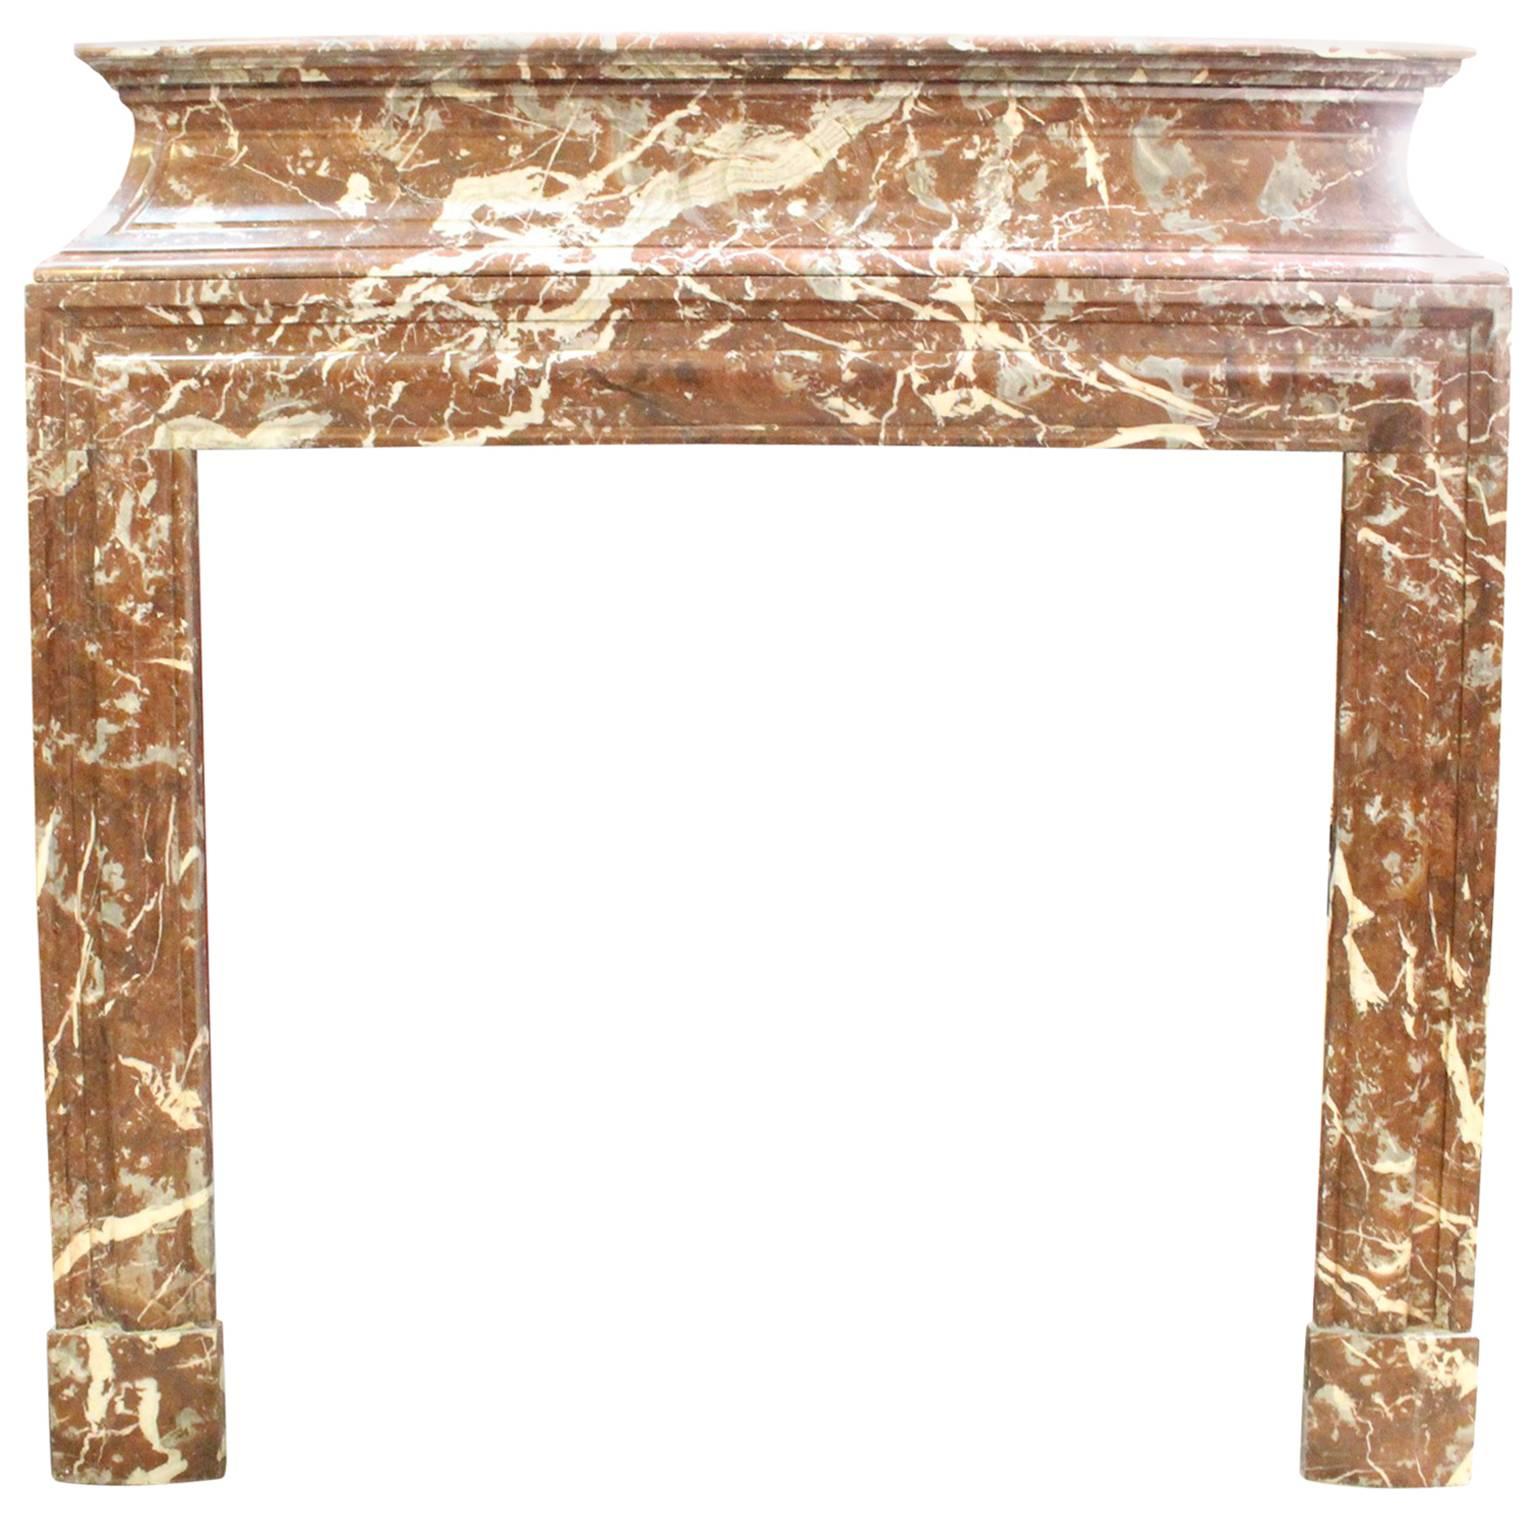 19th Century, French, Louis XIV Style Marble Mantel